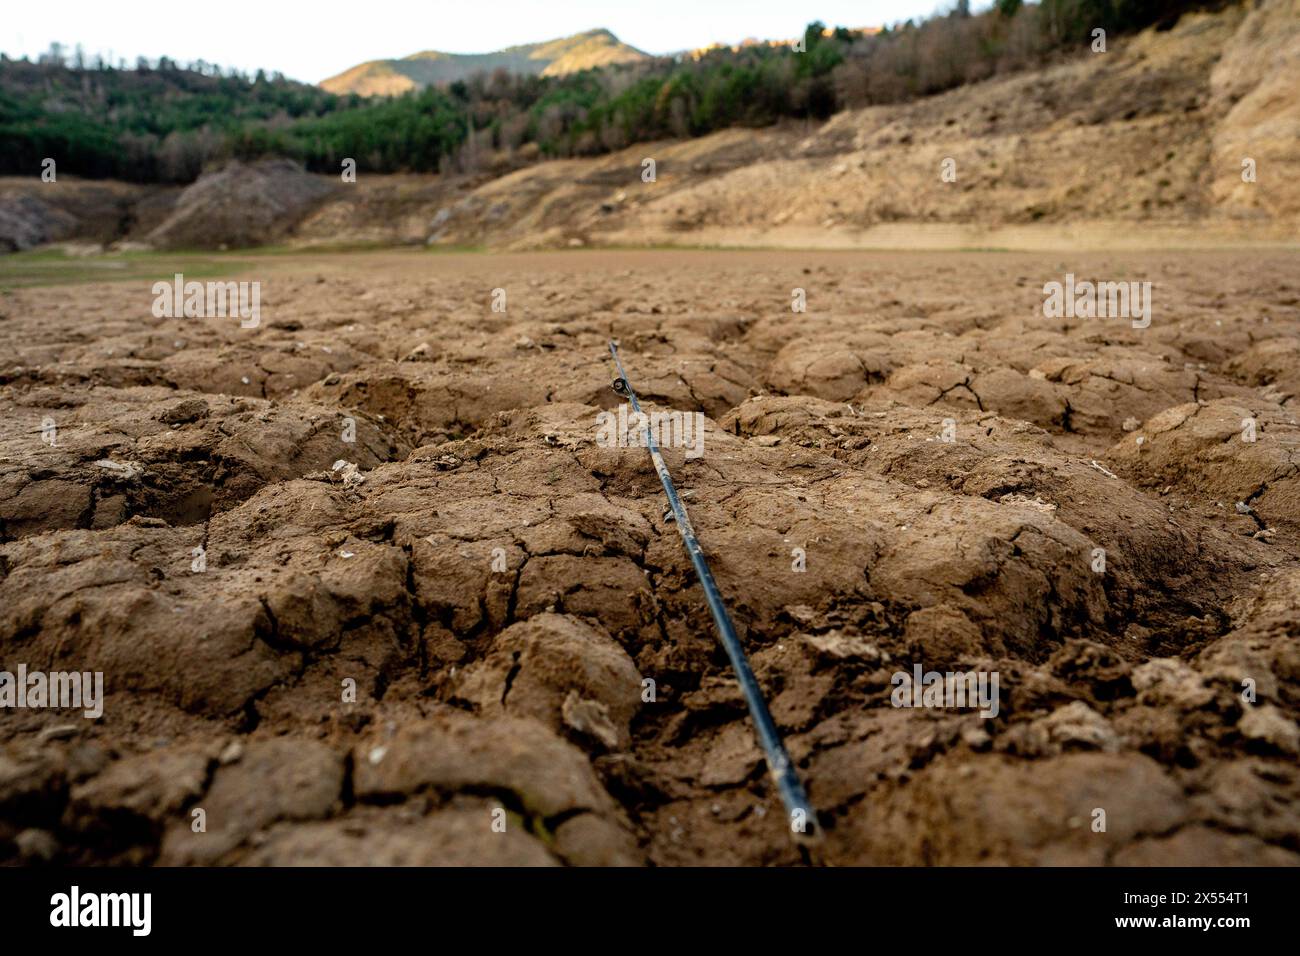 february, 01 2024 Cercs, Spain Drought  Barcelona-Baells Reservoir Drought,Llobregat river  Photo Eric Renom/LaPresse  The Baells reservoir, which is nourished by the Llobregat River, is under minimum levels the day Catalonia declares a state of emergency due to drought in the metropolitan area of Barcelona, limiting the use of water or showers in gyms. The Llobregat River, the river that feeds this reservoir, is the most industrialized river in Catalonia, as it supplies the entire industrial area around Barcelona and is therefore vital for the operation of the Catalan industry, from the car b Stock Photo